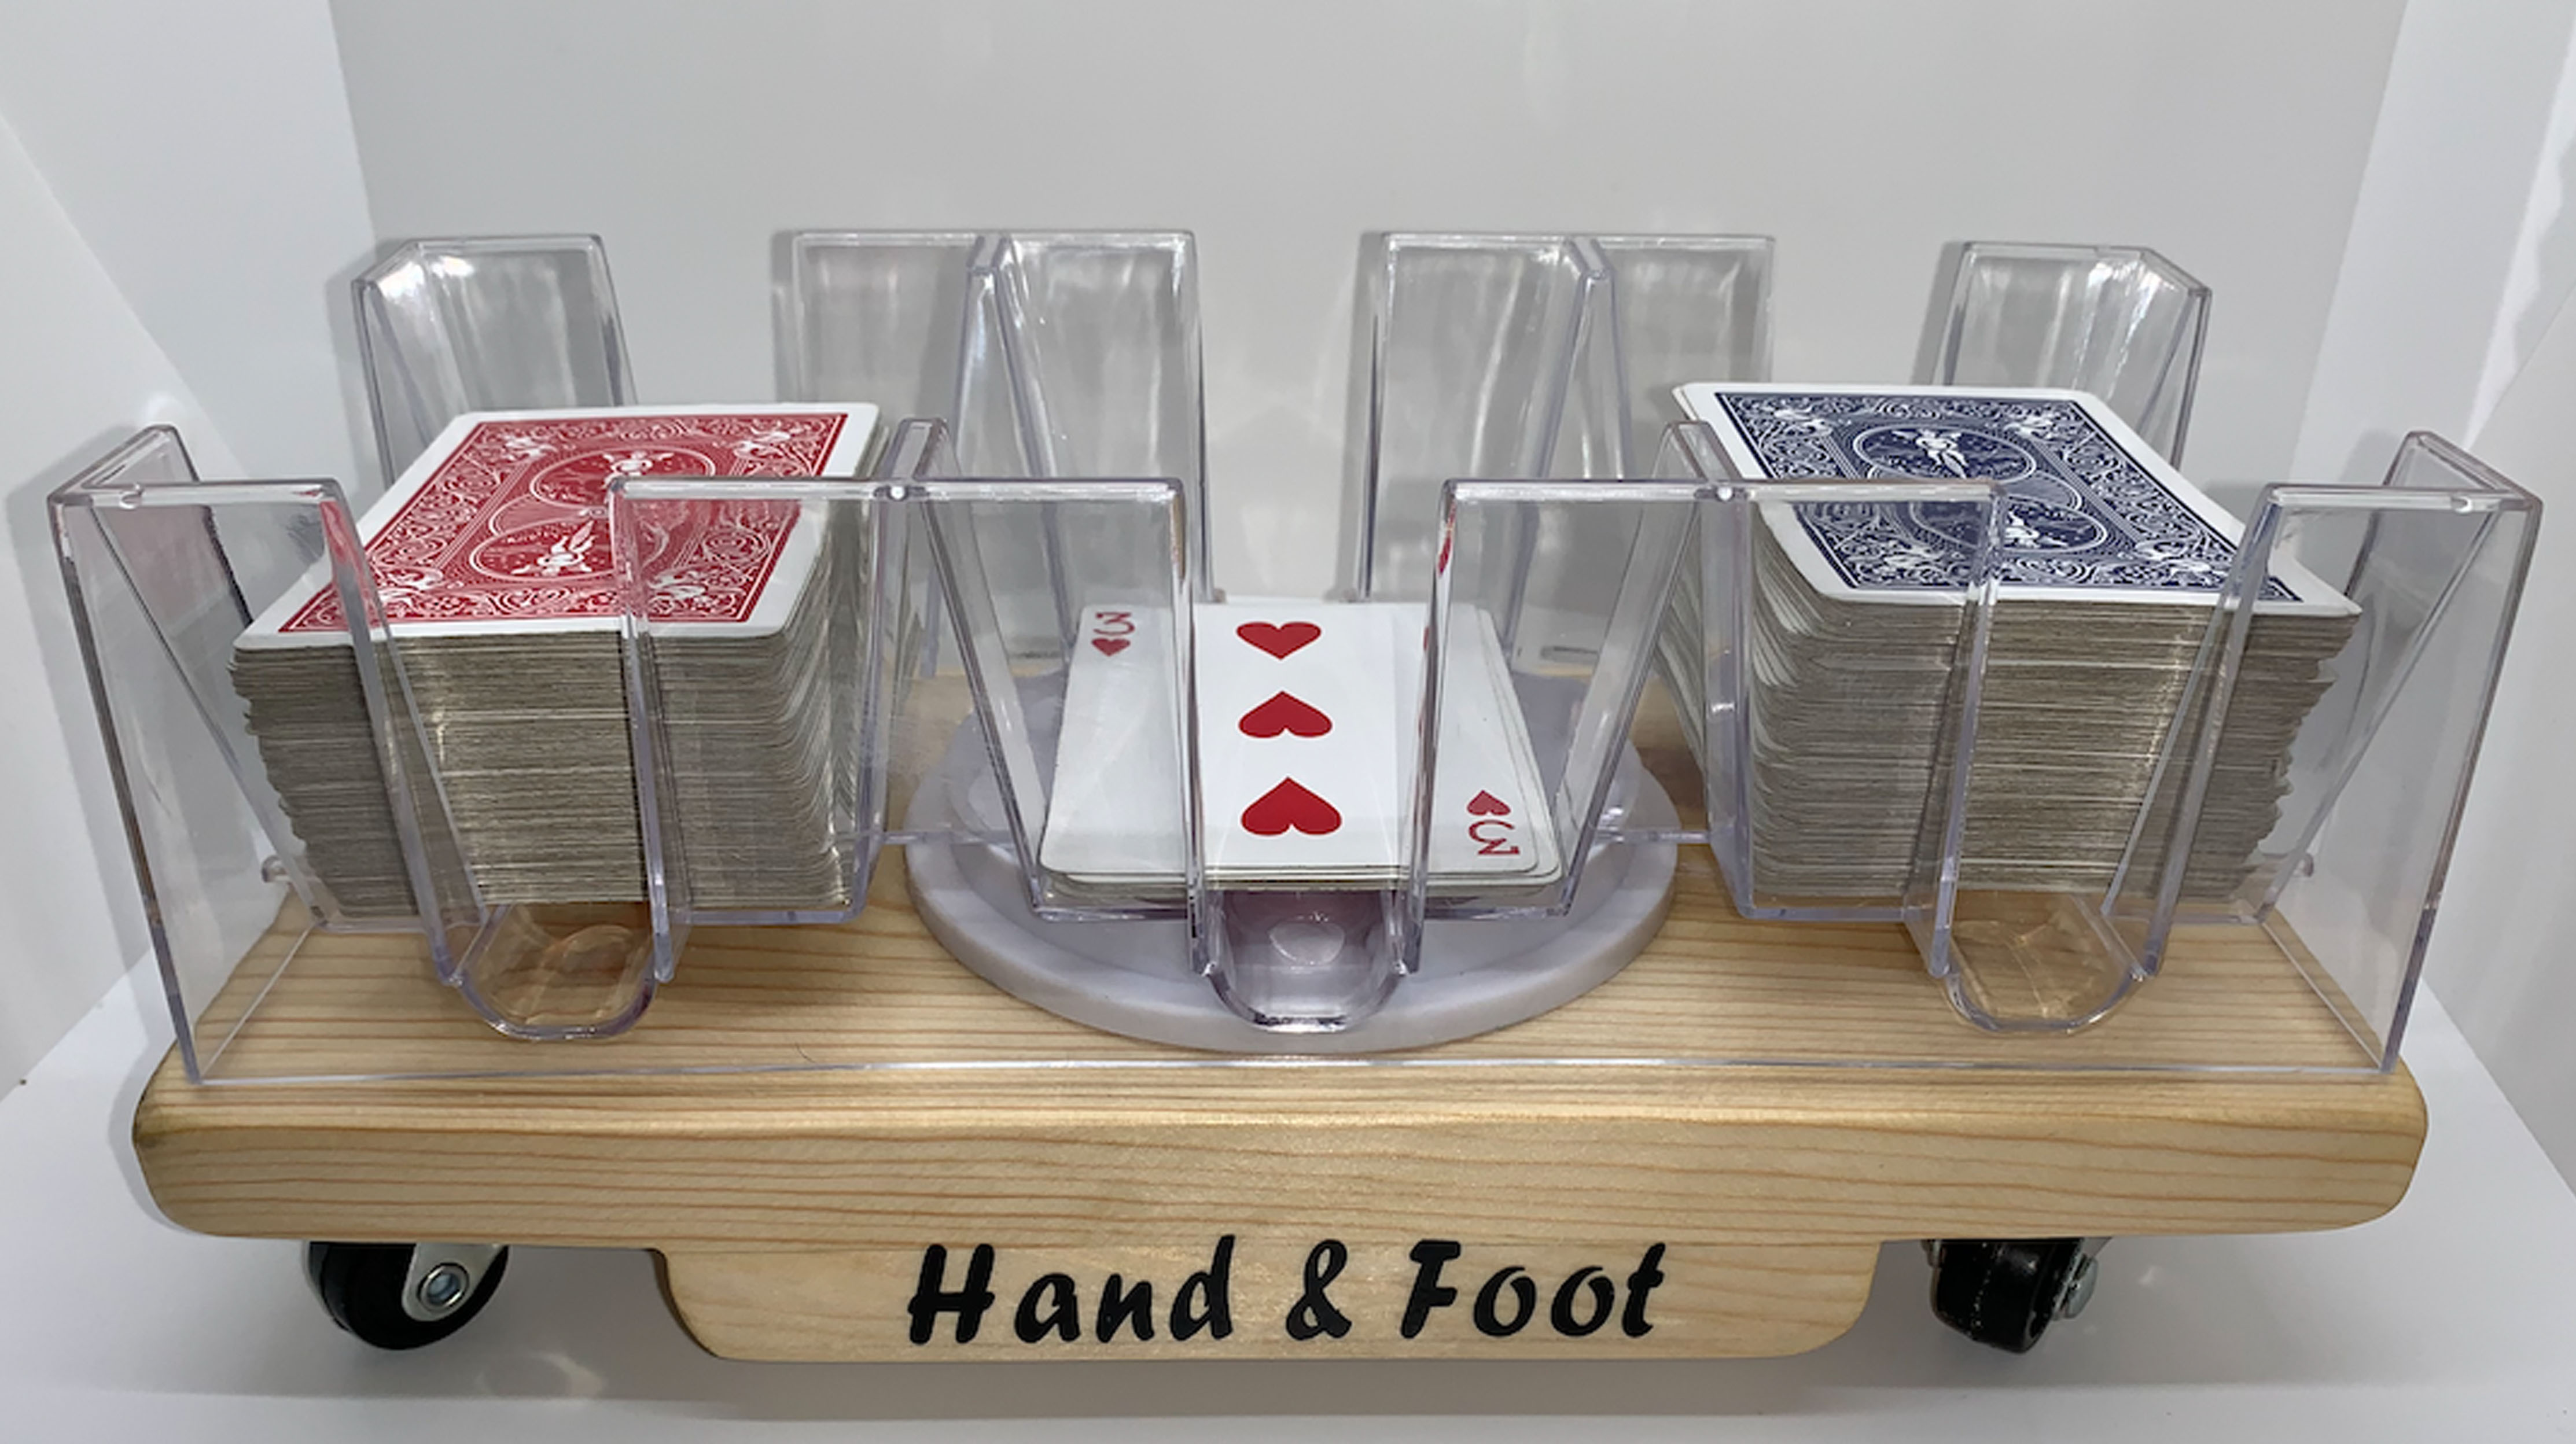 3 Deck Rolling Hand and foot